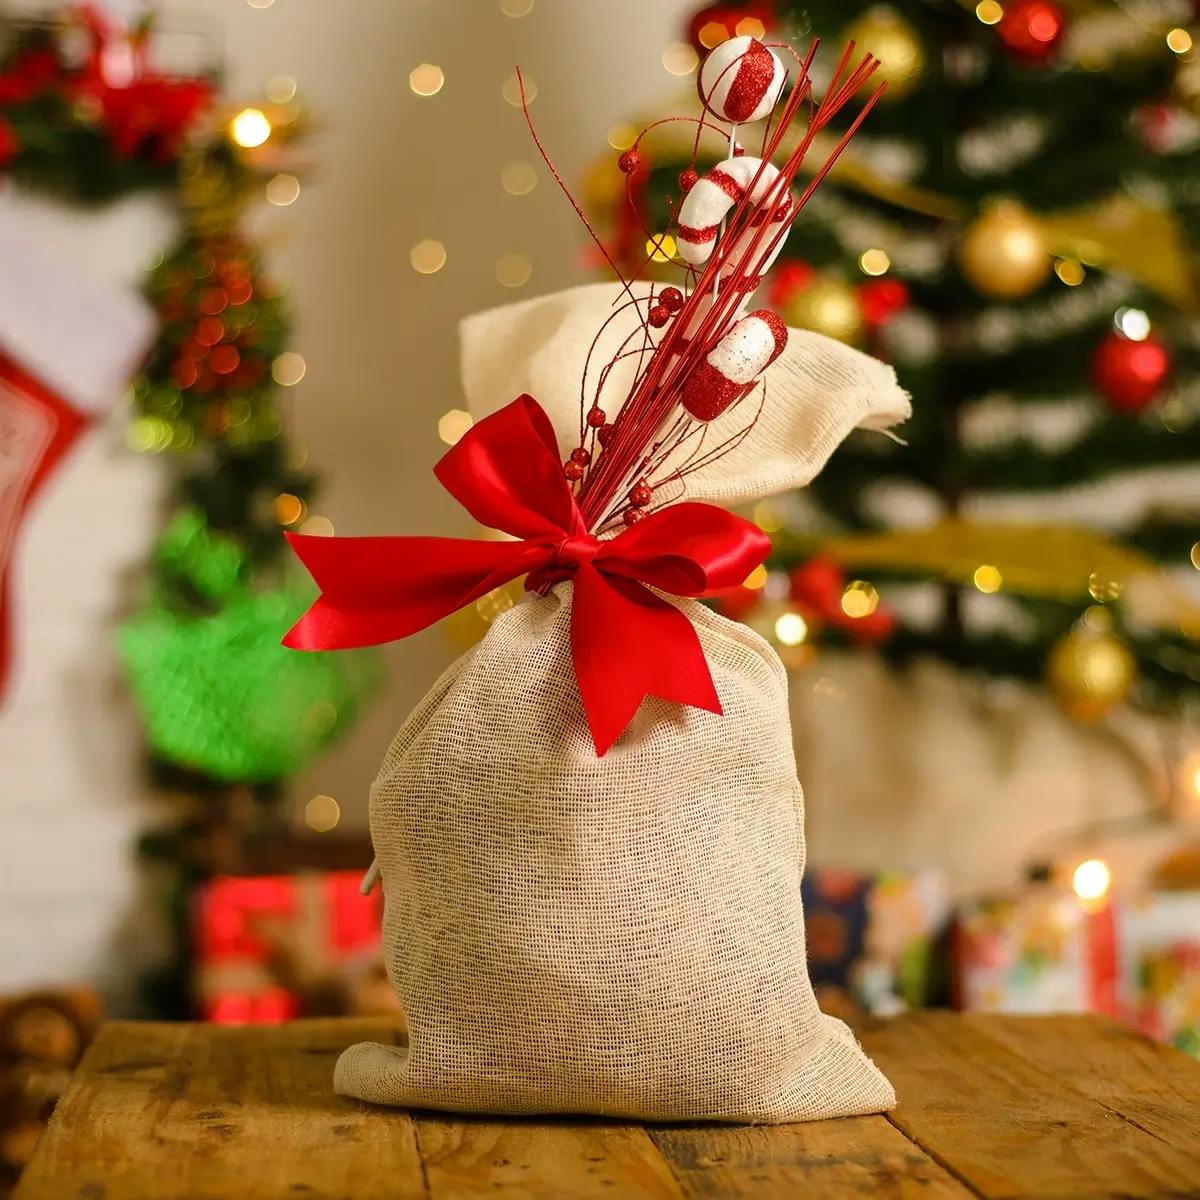 Hessian Christmas goodie bag tied with red ribbon, with Christmas tree in the background.